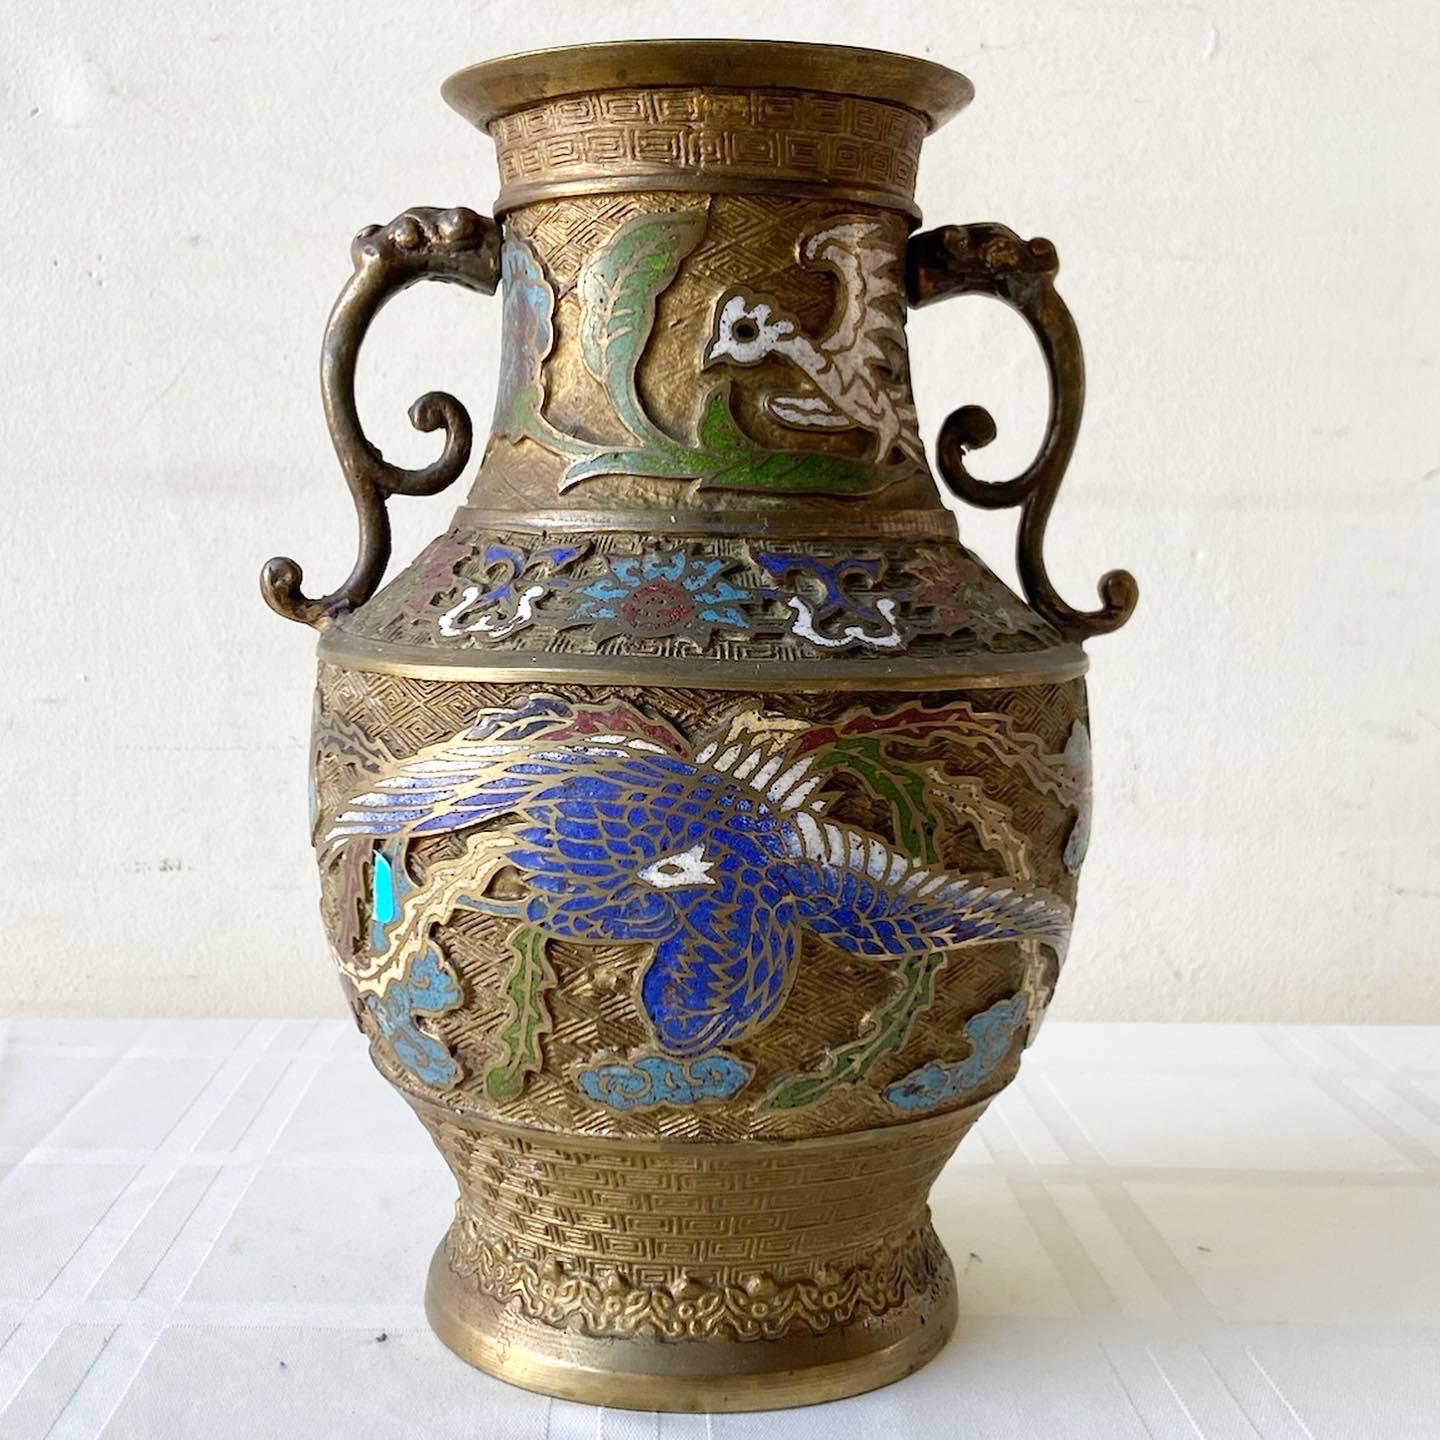 Stunning early 20th century Japanese brass champleve vase. Features a vibrant enamel design throughout the vase.
 